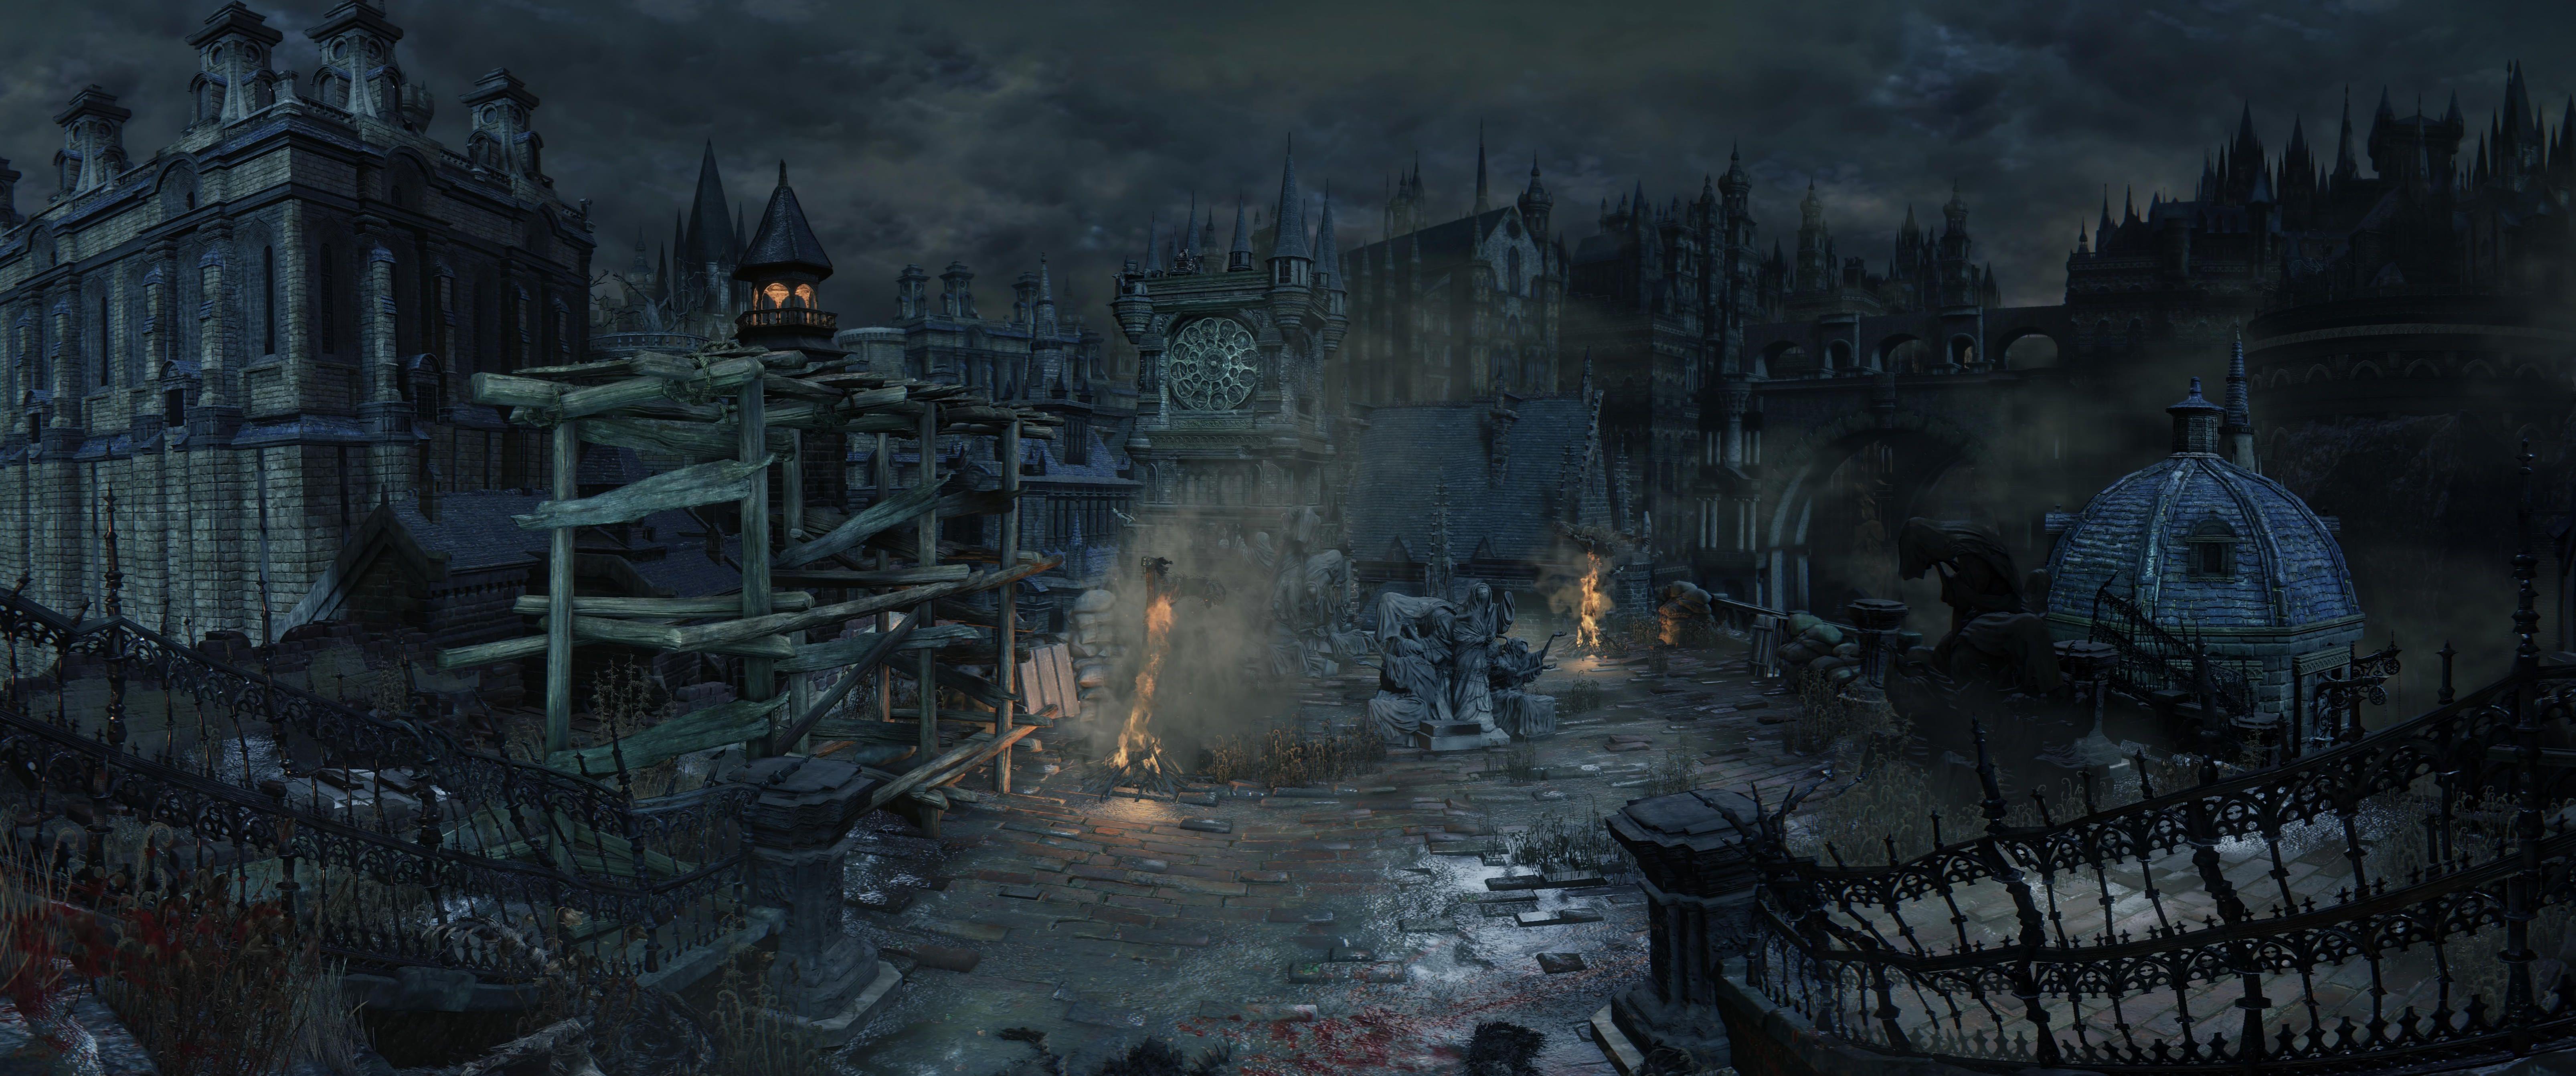 Bloodborne City Wallpapers - Top Free Bloodborne City Backgrounds